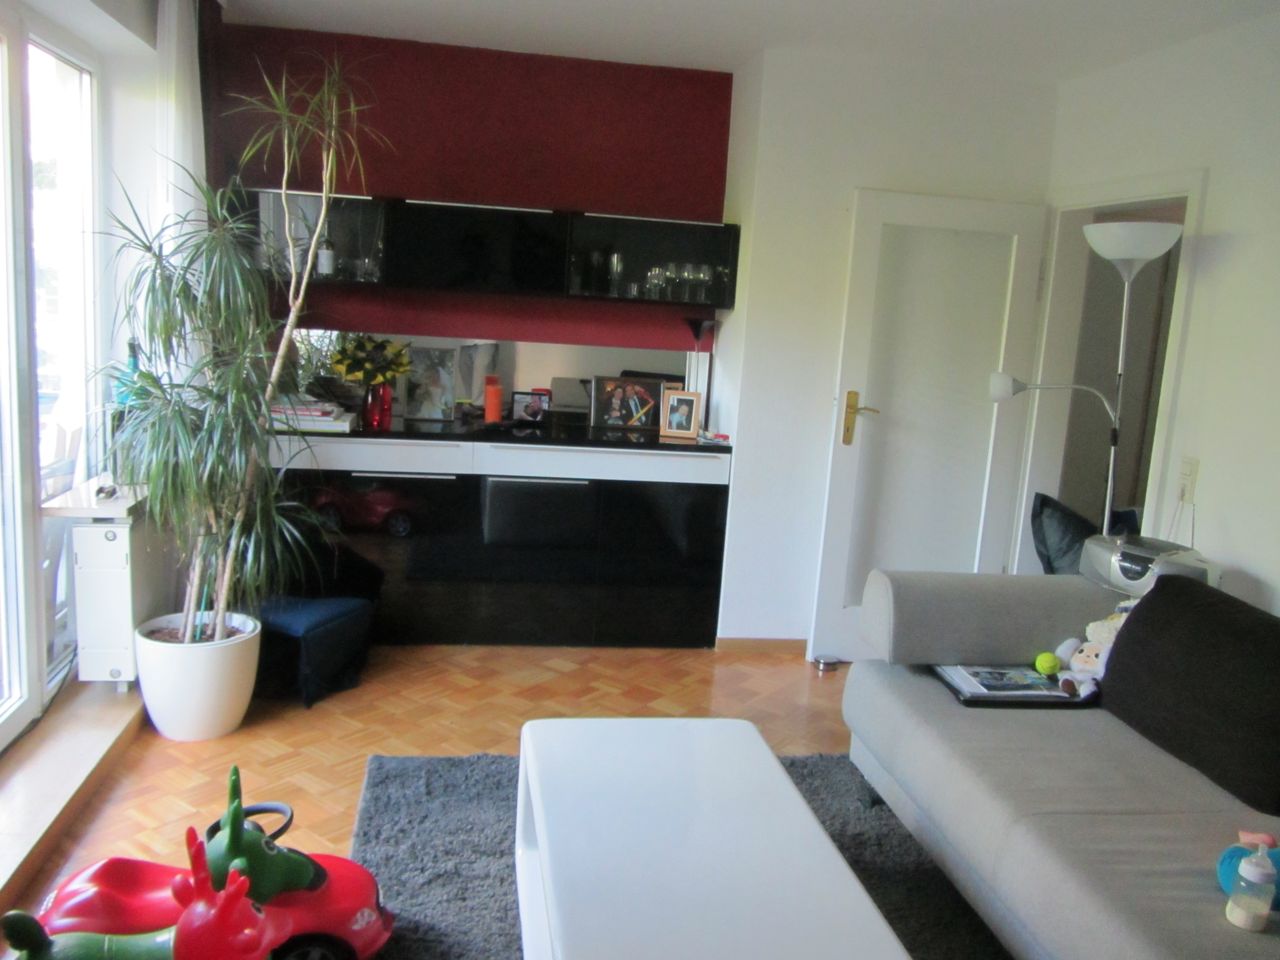 Modernly furnished 4 room apartment in the heart of the Heusteigviertel